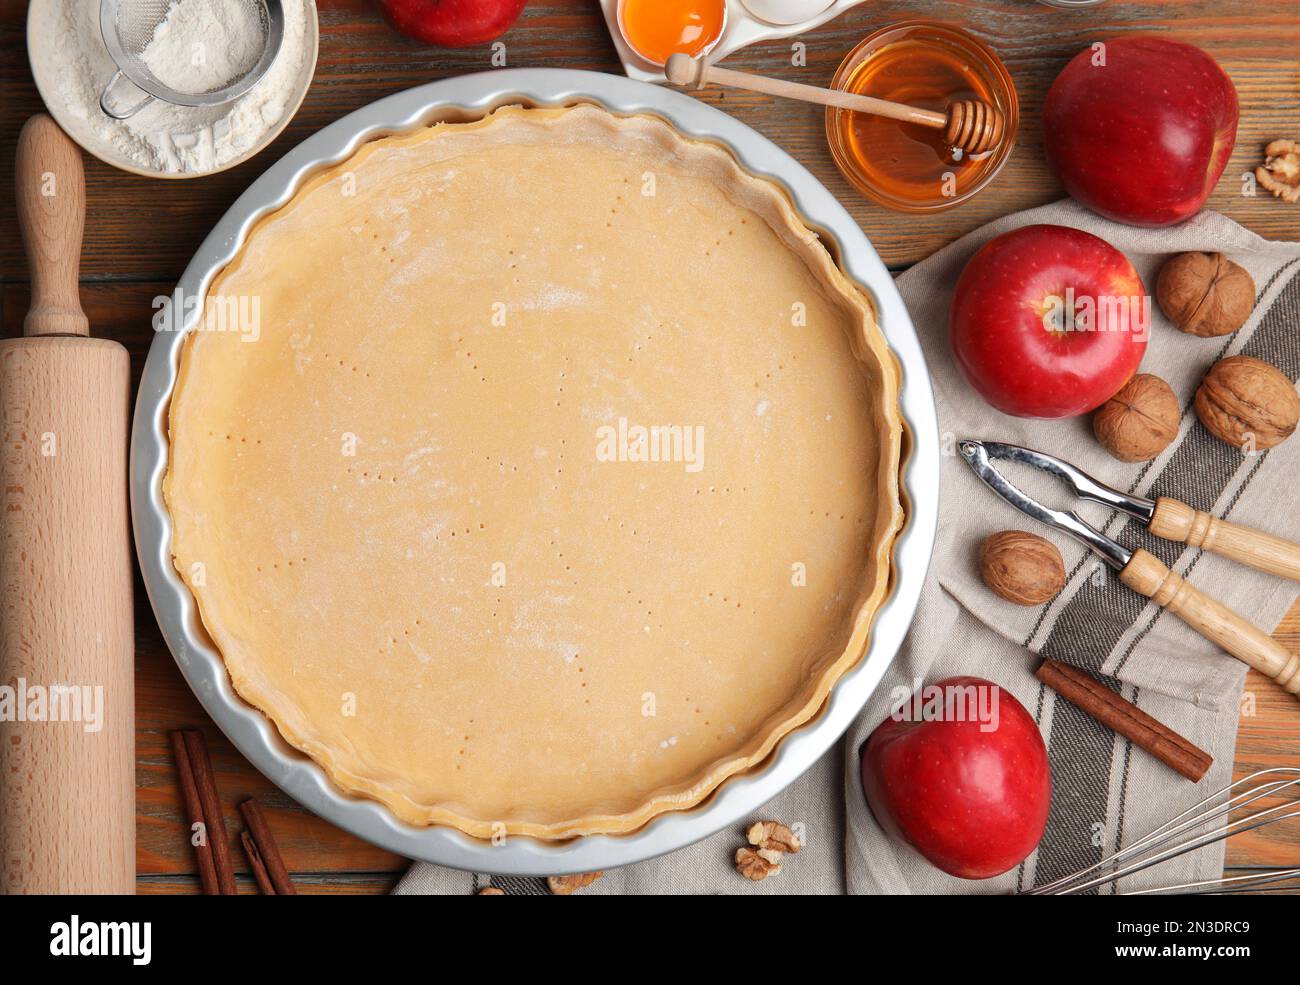 Raw dough and ingredients for traditional English apple pie on wooden table, flat lay Stock Photo